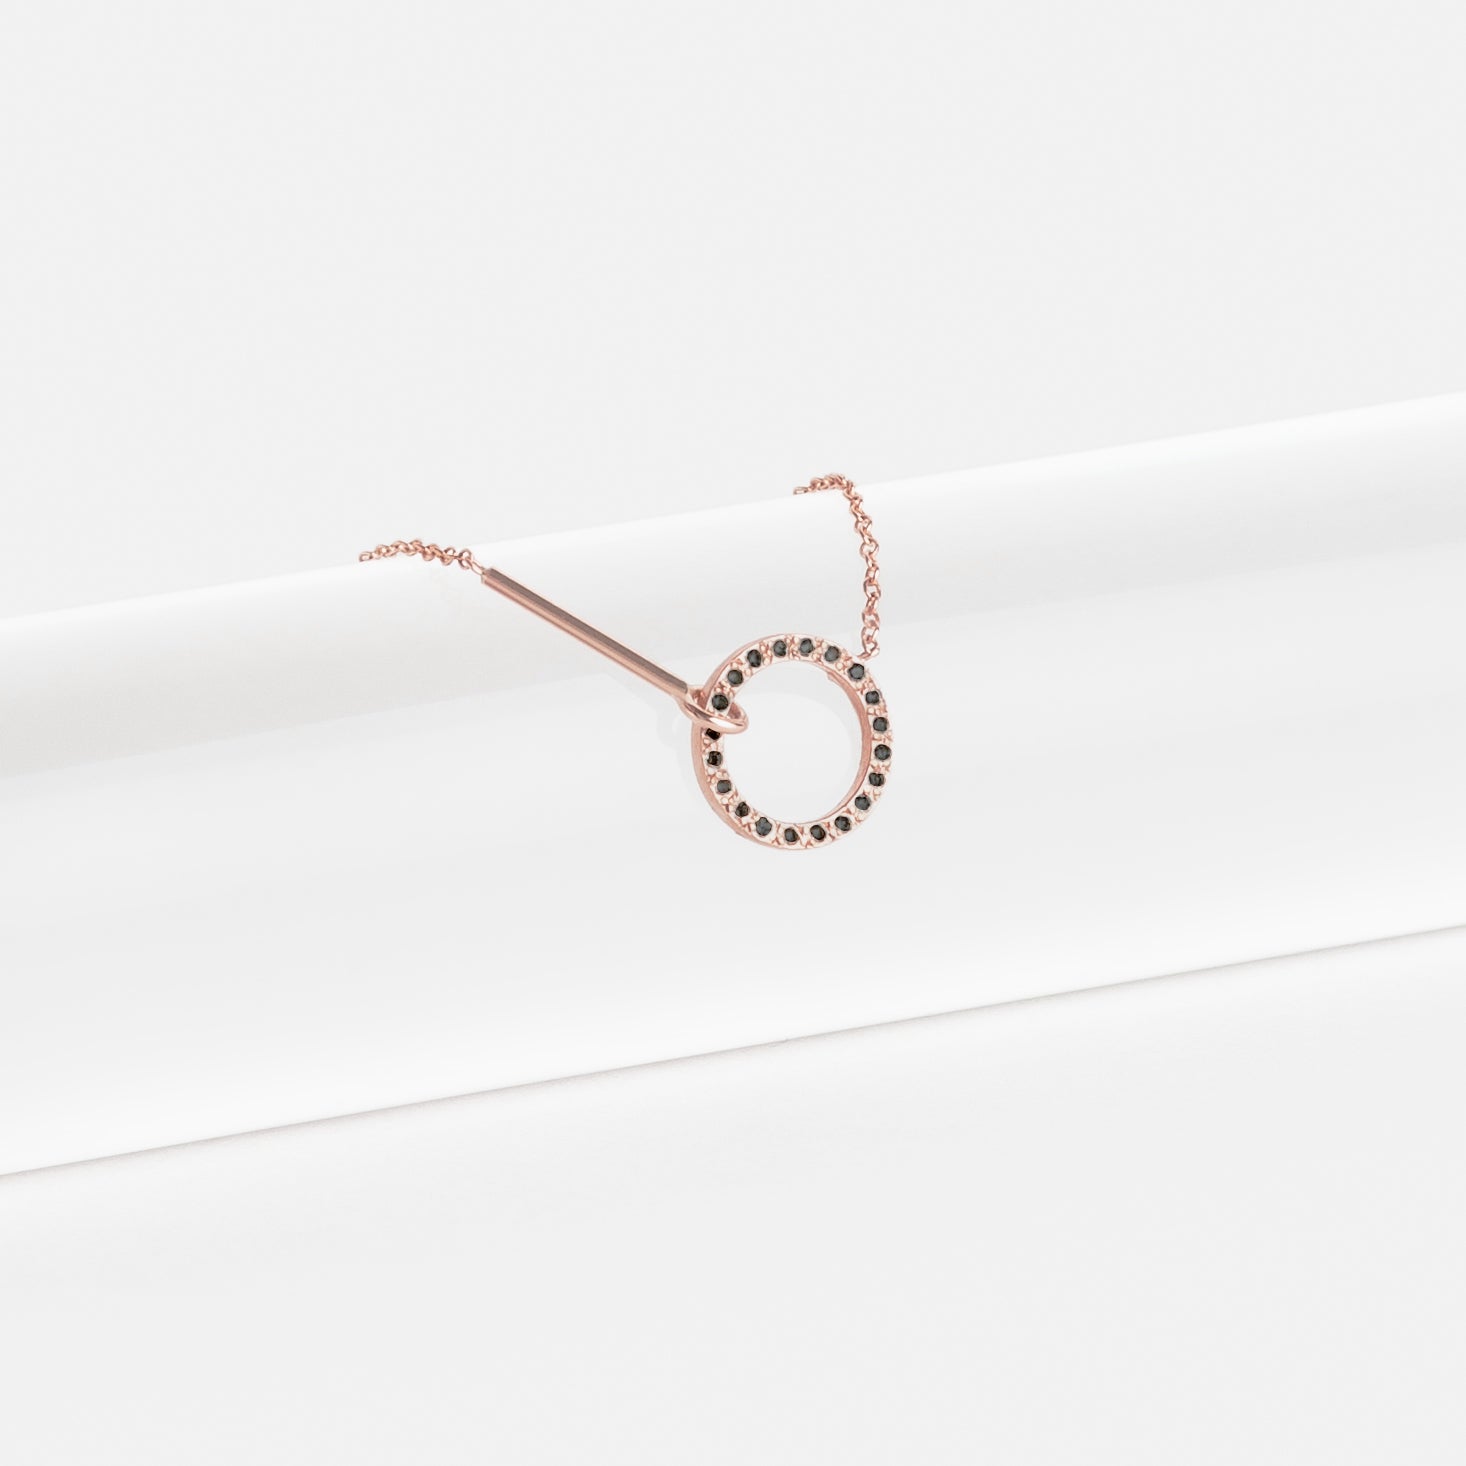 Visata Unconventional Necklace in 14k Rose Gold set with Black Diamonds By SHW Fine Jewelry NYC